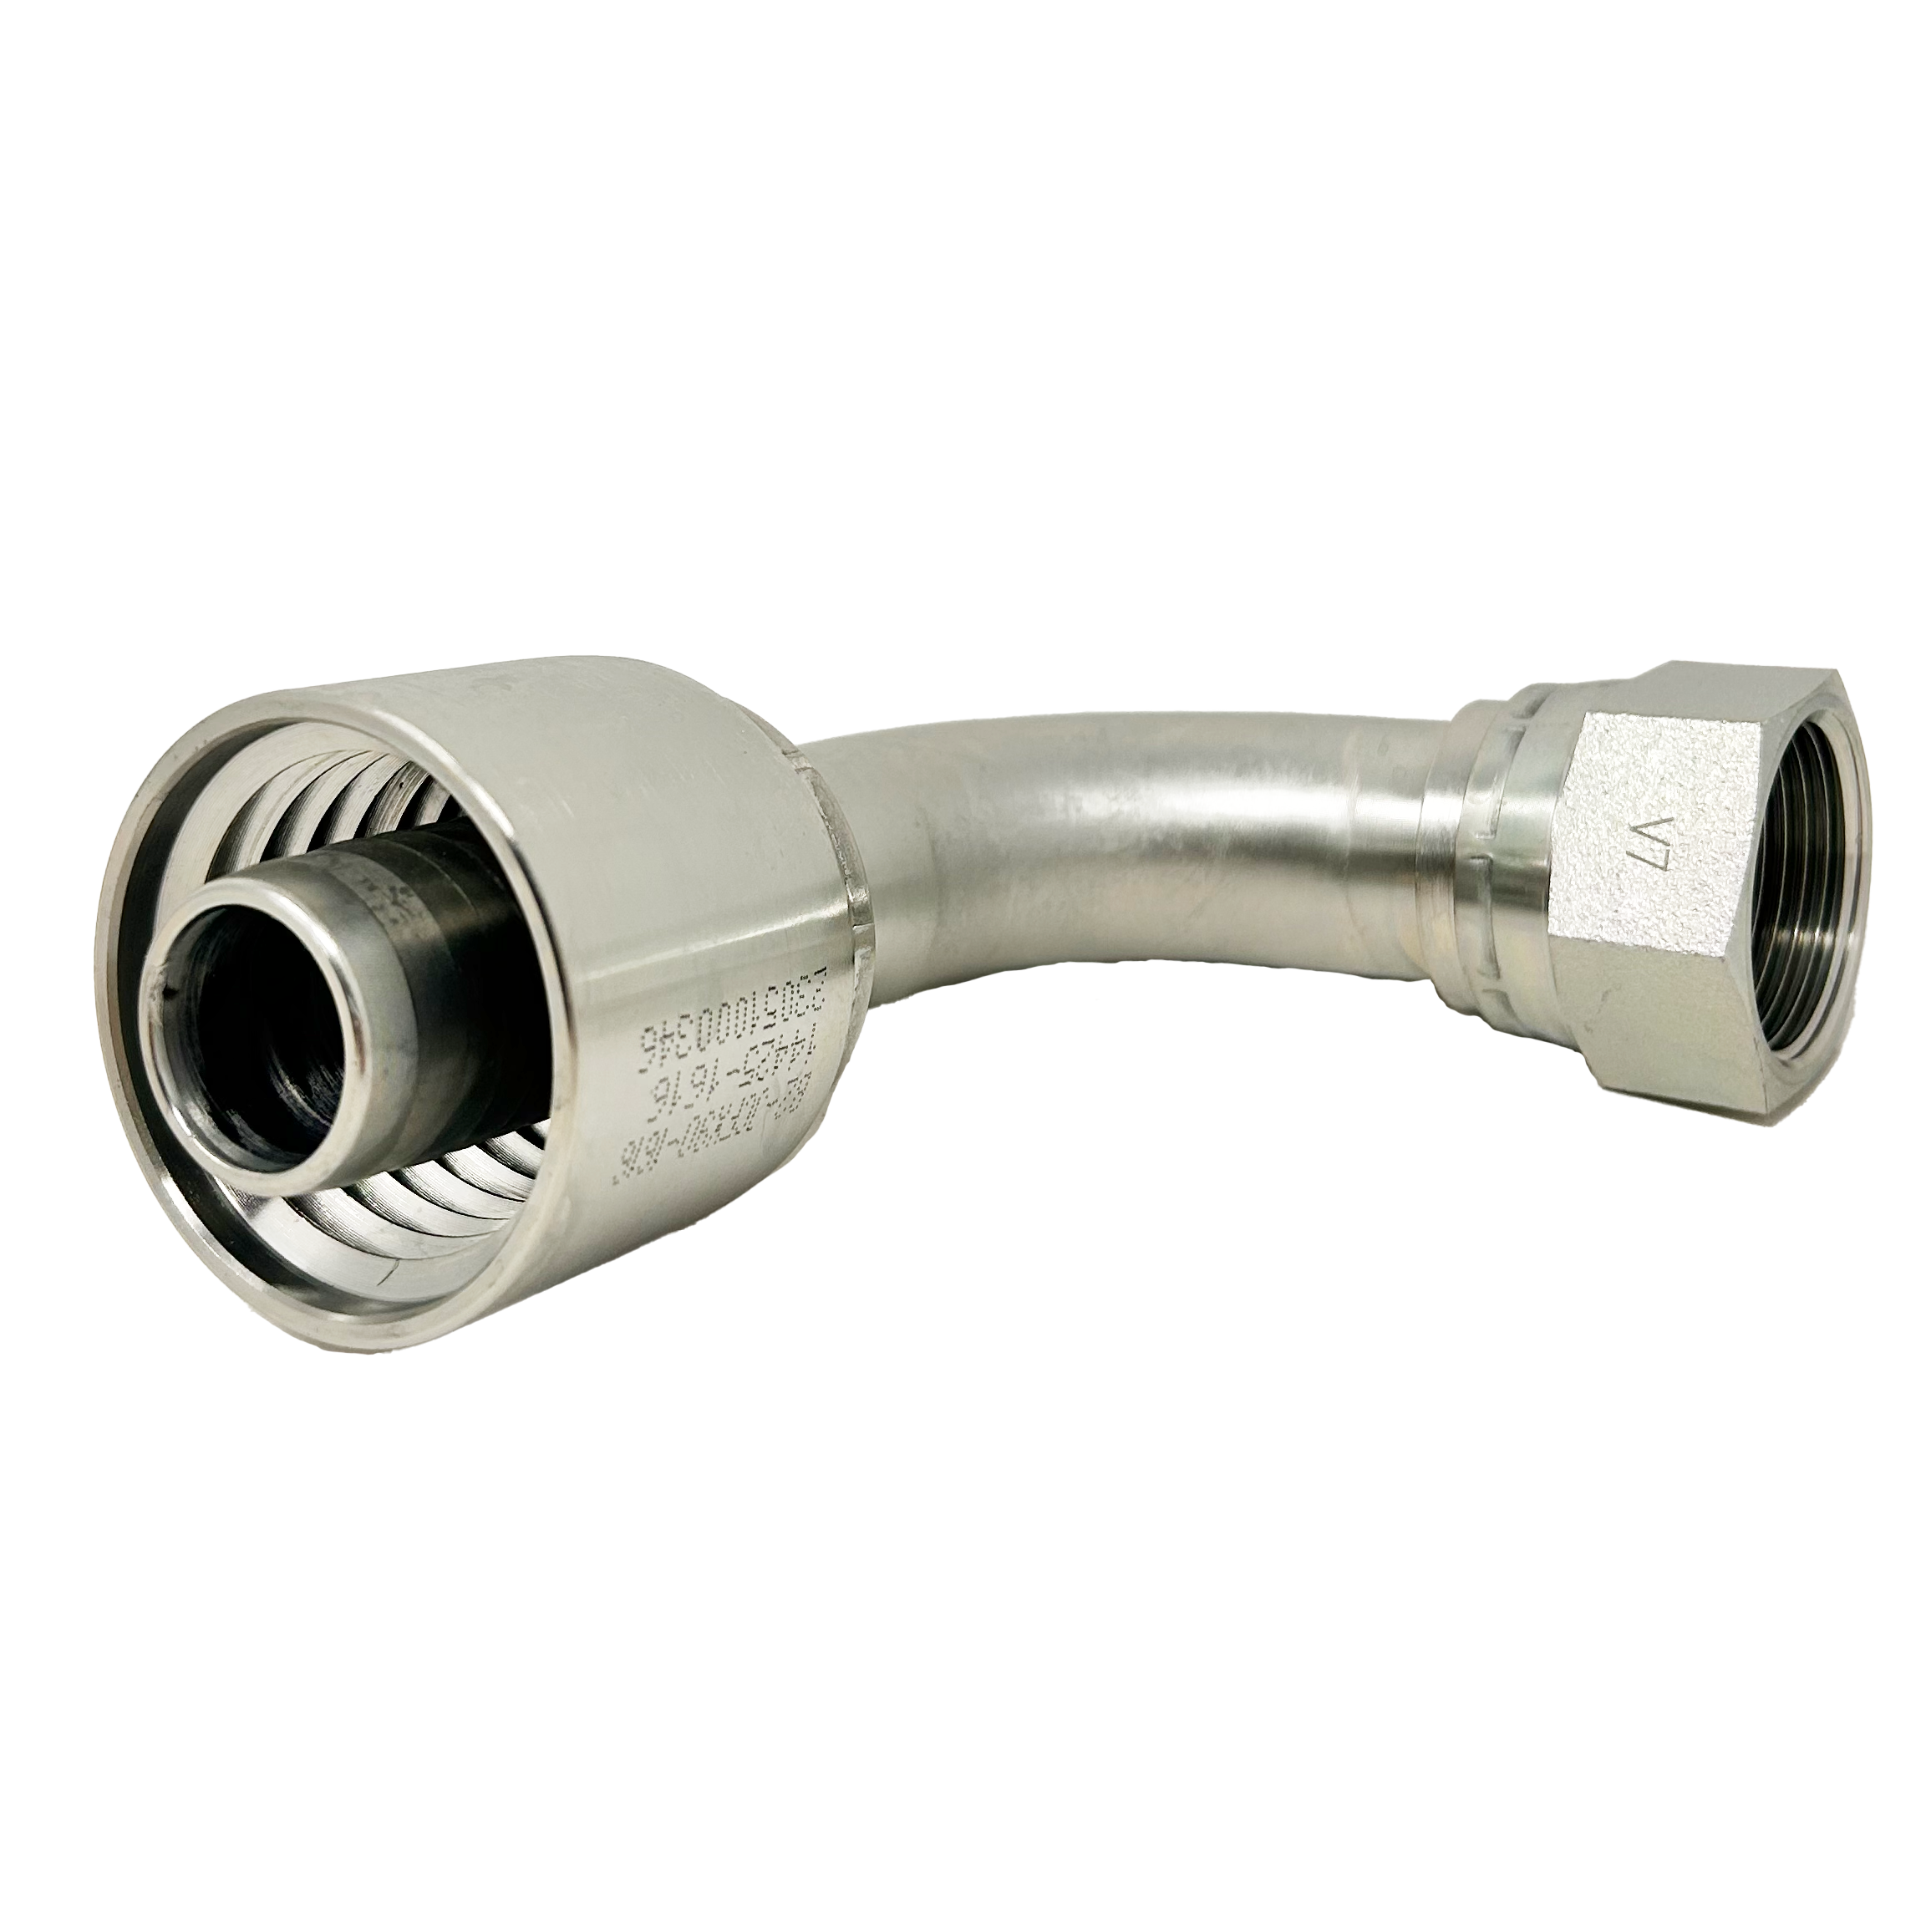 B2-JCFX90-0606S: Continental Hose Fitting, 0.375 (3/8") Hose ID x 9/16-18 Female JIC, 90-Degree Swivel Connection